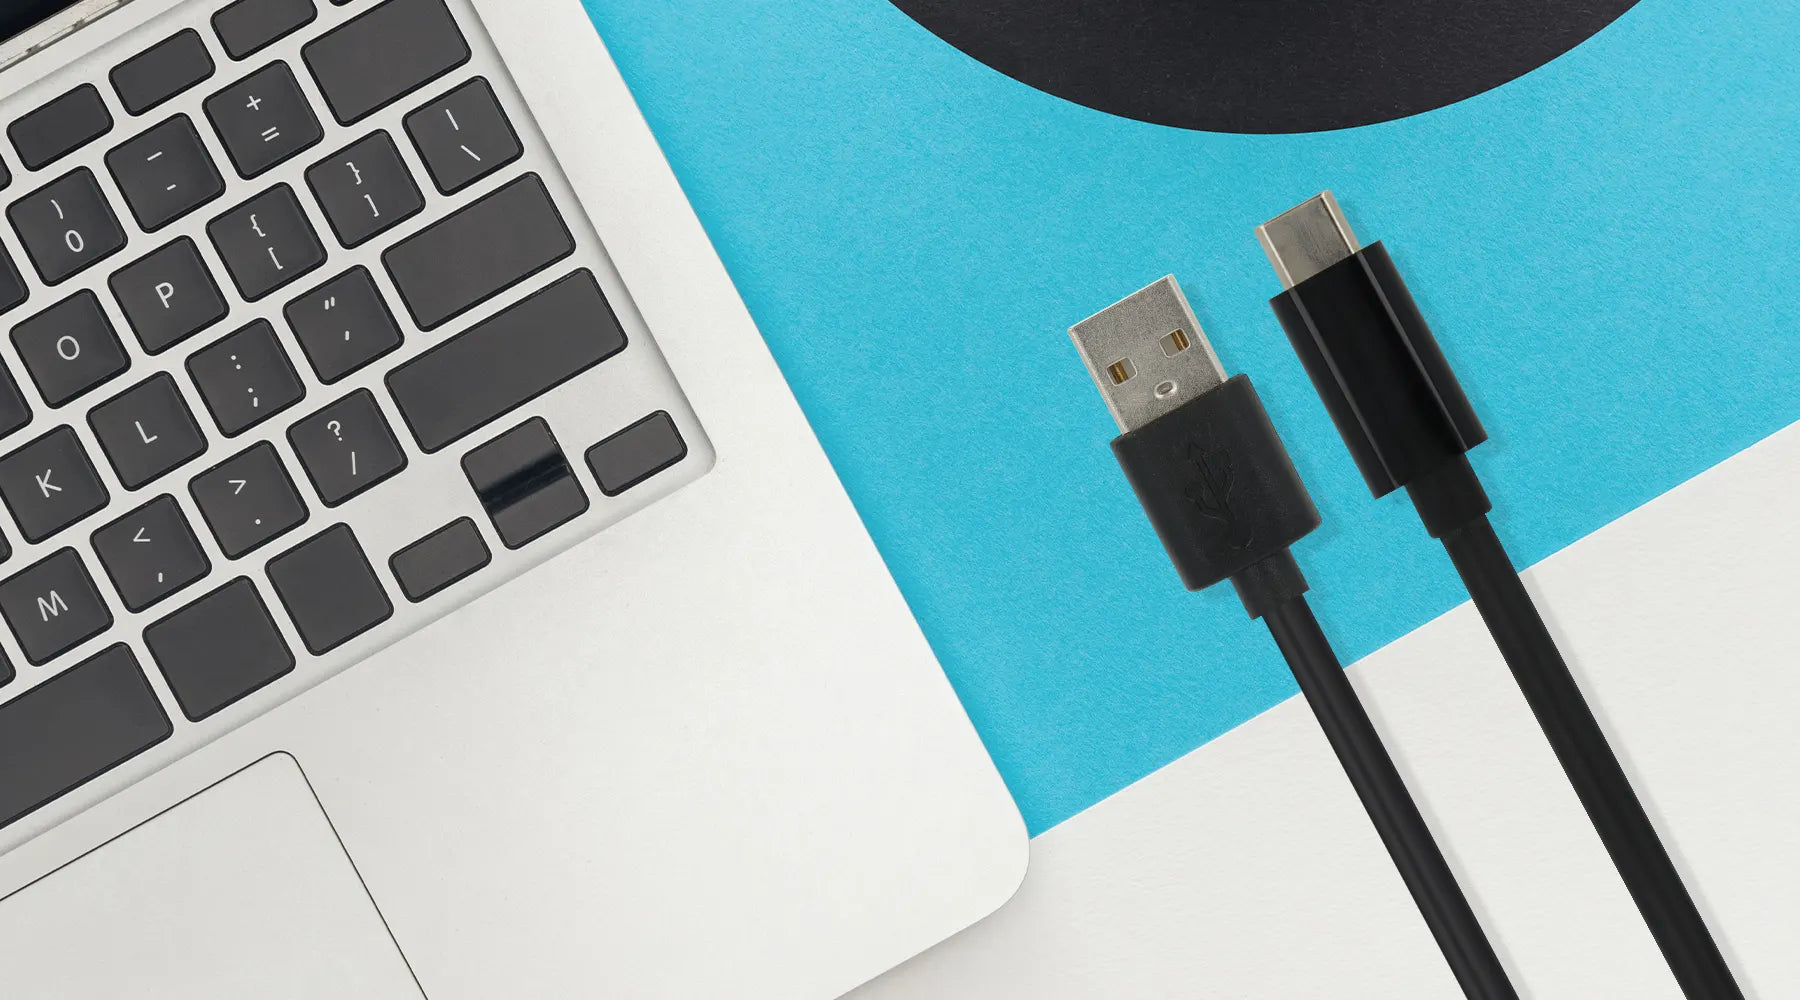 What is USB-C: Background and Overview 